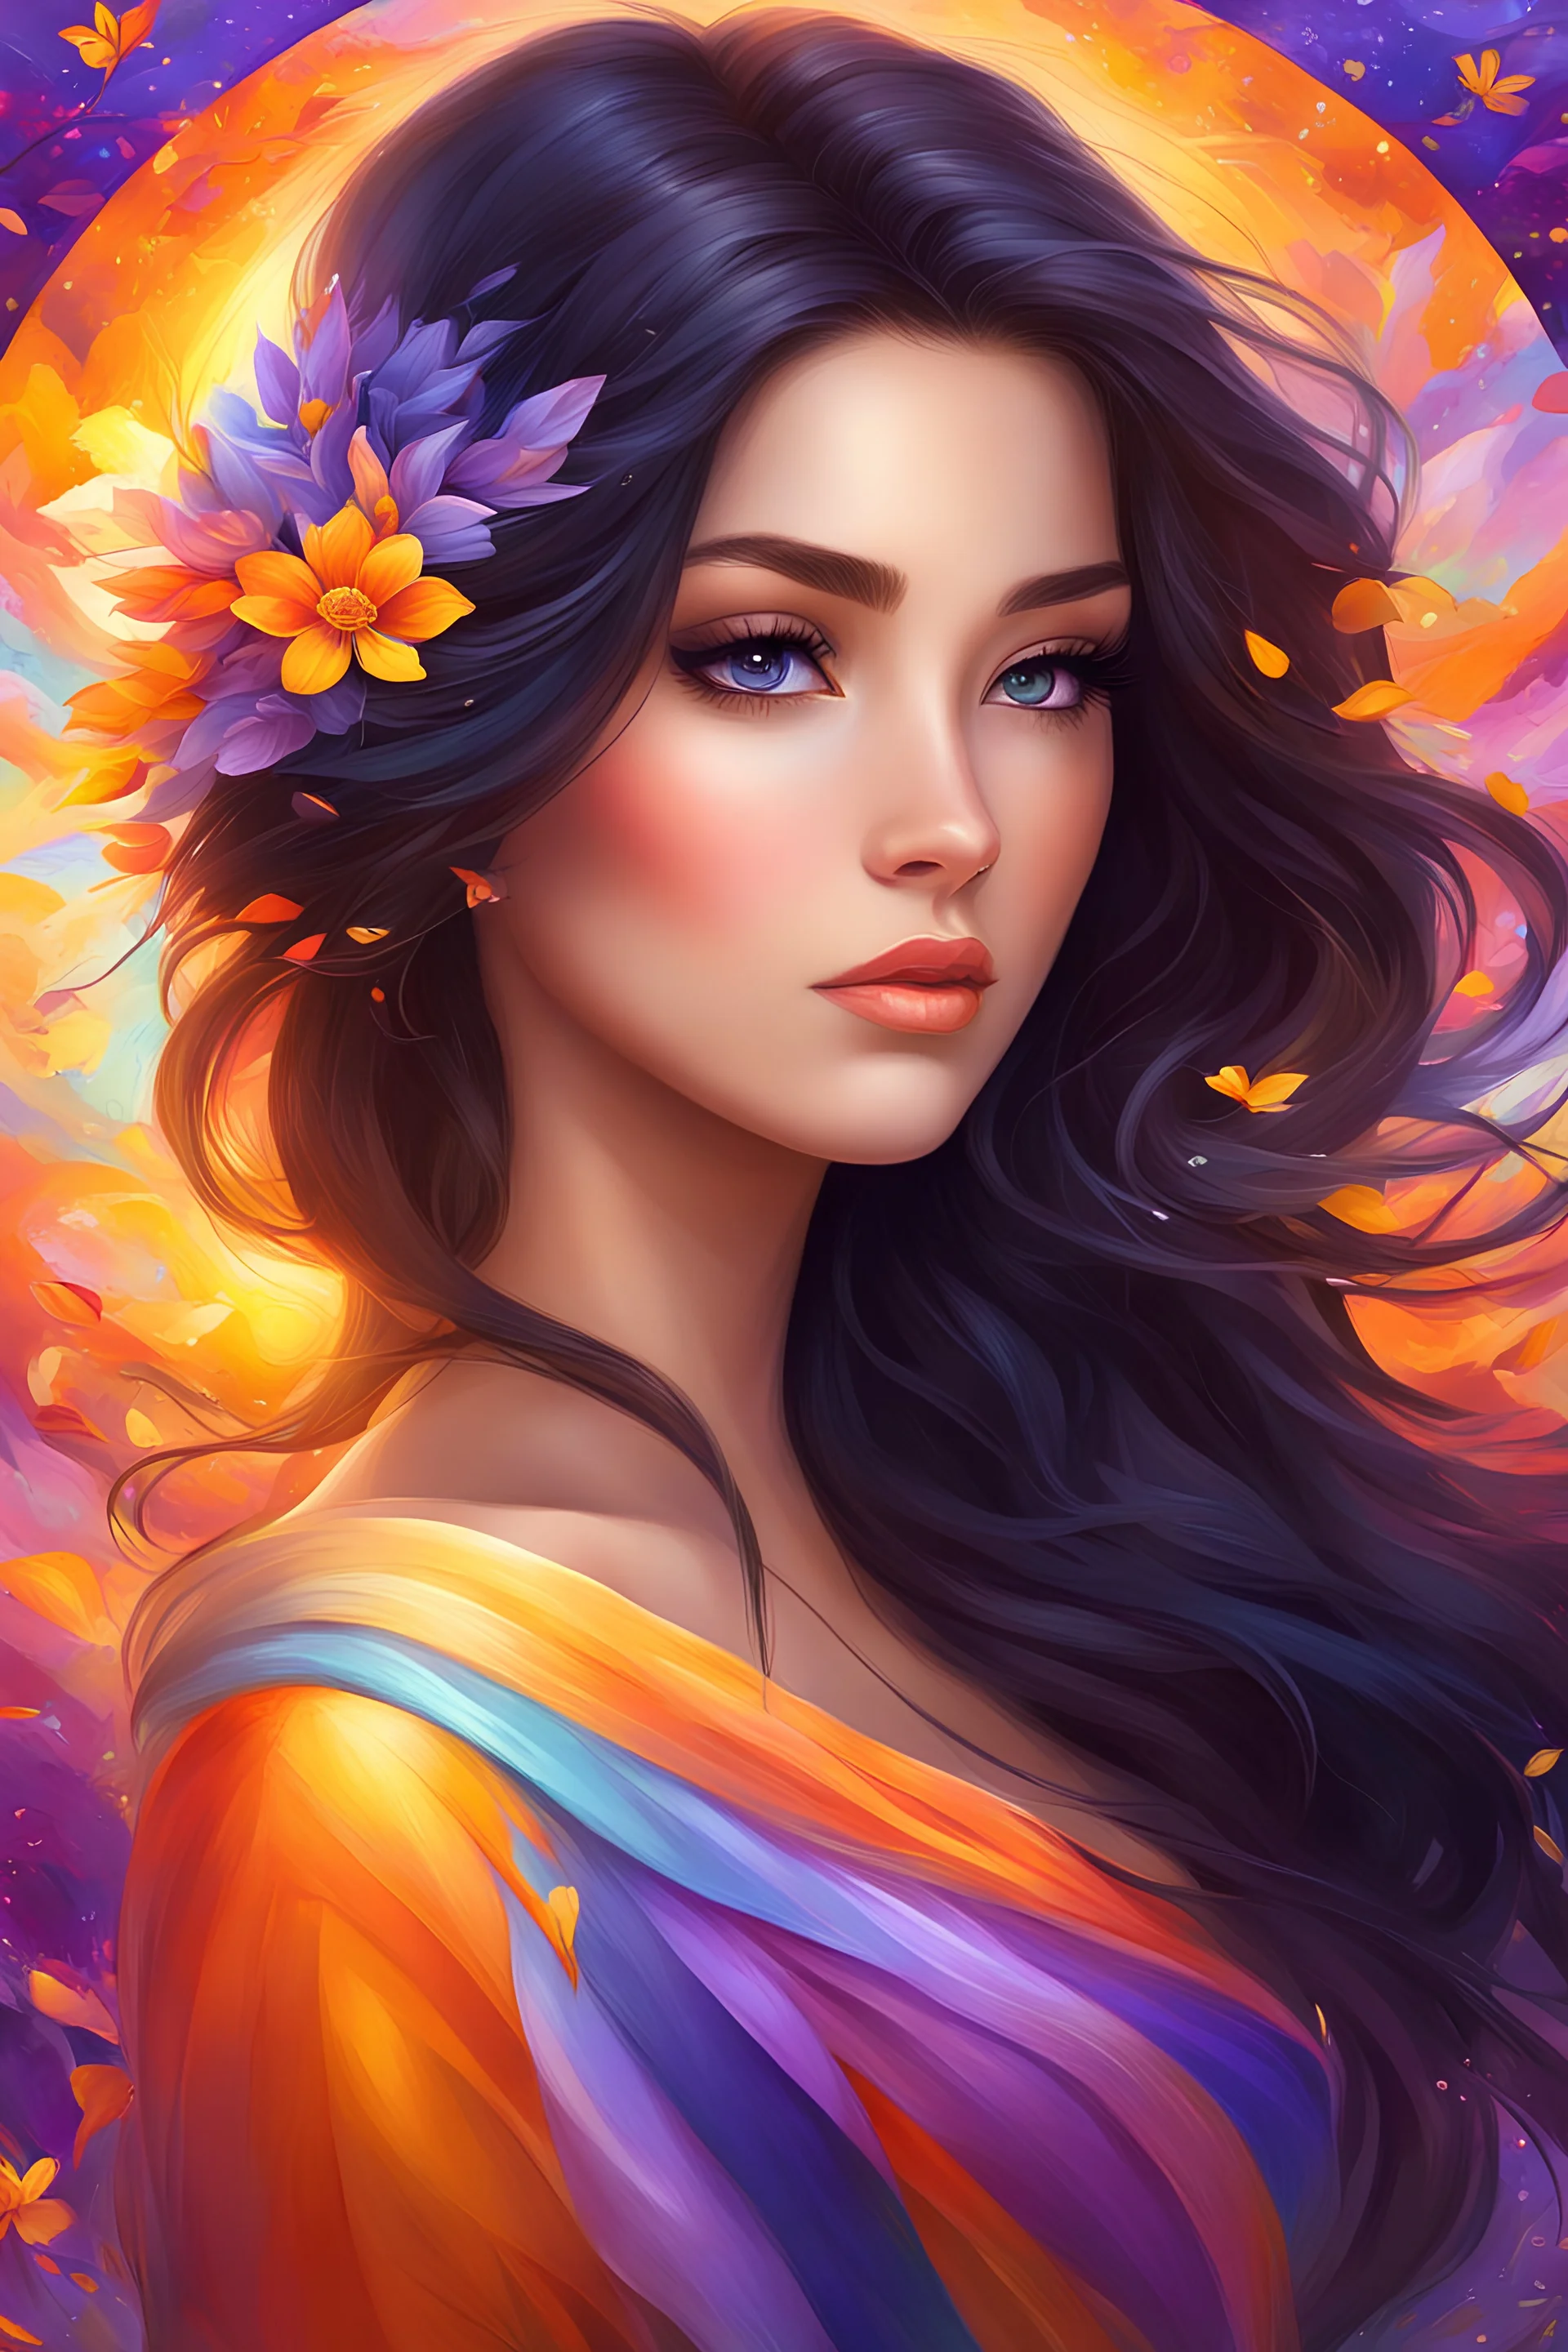 Masterpiece, best quality, digital painting style, adorable digital painting, beautiful fantasy art, colorful. Her dark hair cascades, and her kind eyes seem like gentle winds blowing. With awe, she gazes at the vibrant hues of the sunset - a kaleidoscope of orange, purple, and yellow. Enveloped in the embrace of spring's gentle spell, her heart awakens to the beauty that dwells around her. The world is so colorful, ablaze with life's zest, and she becomes part of nature's eternal quest.